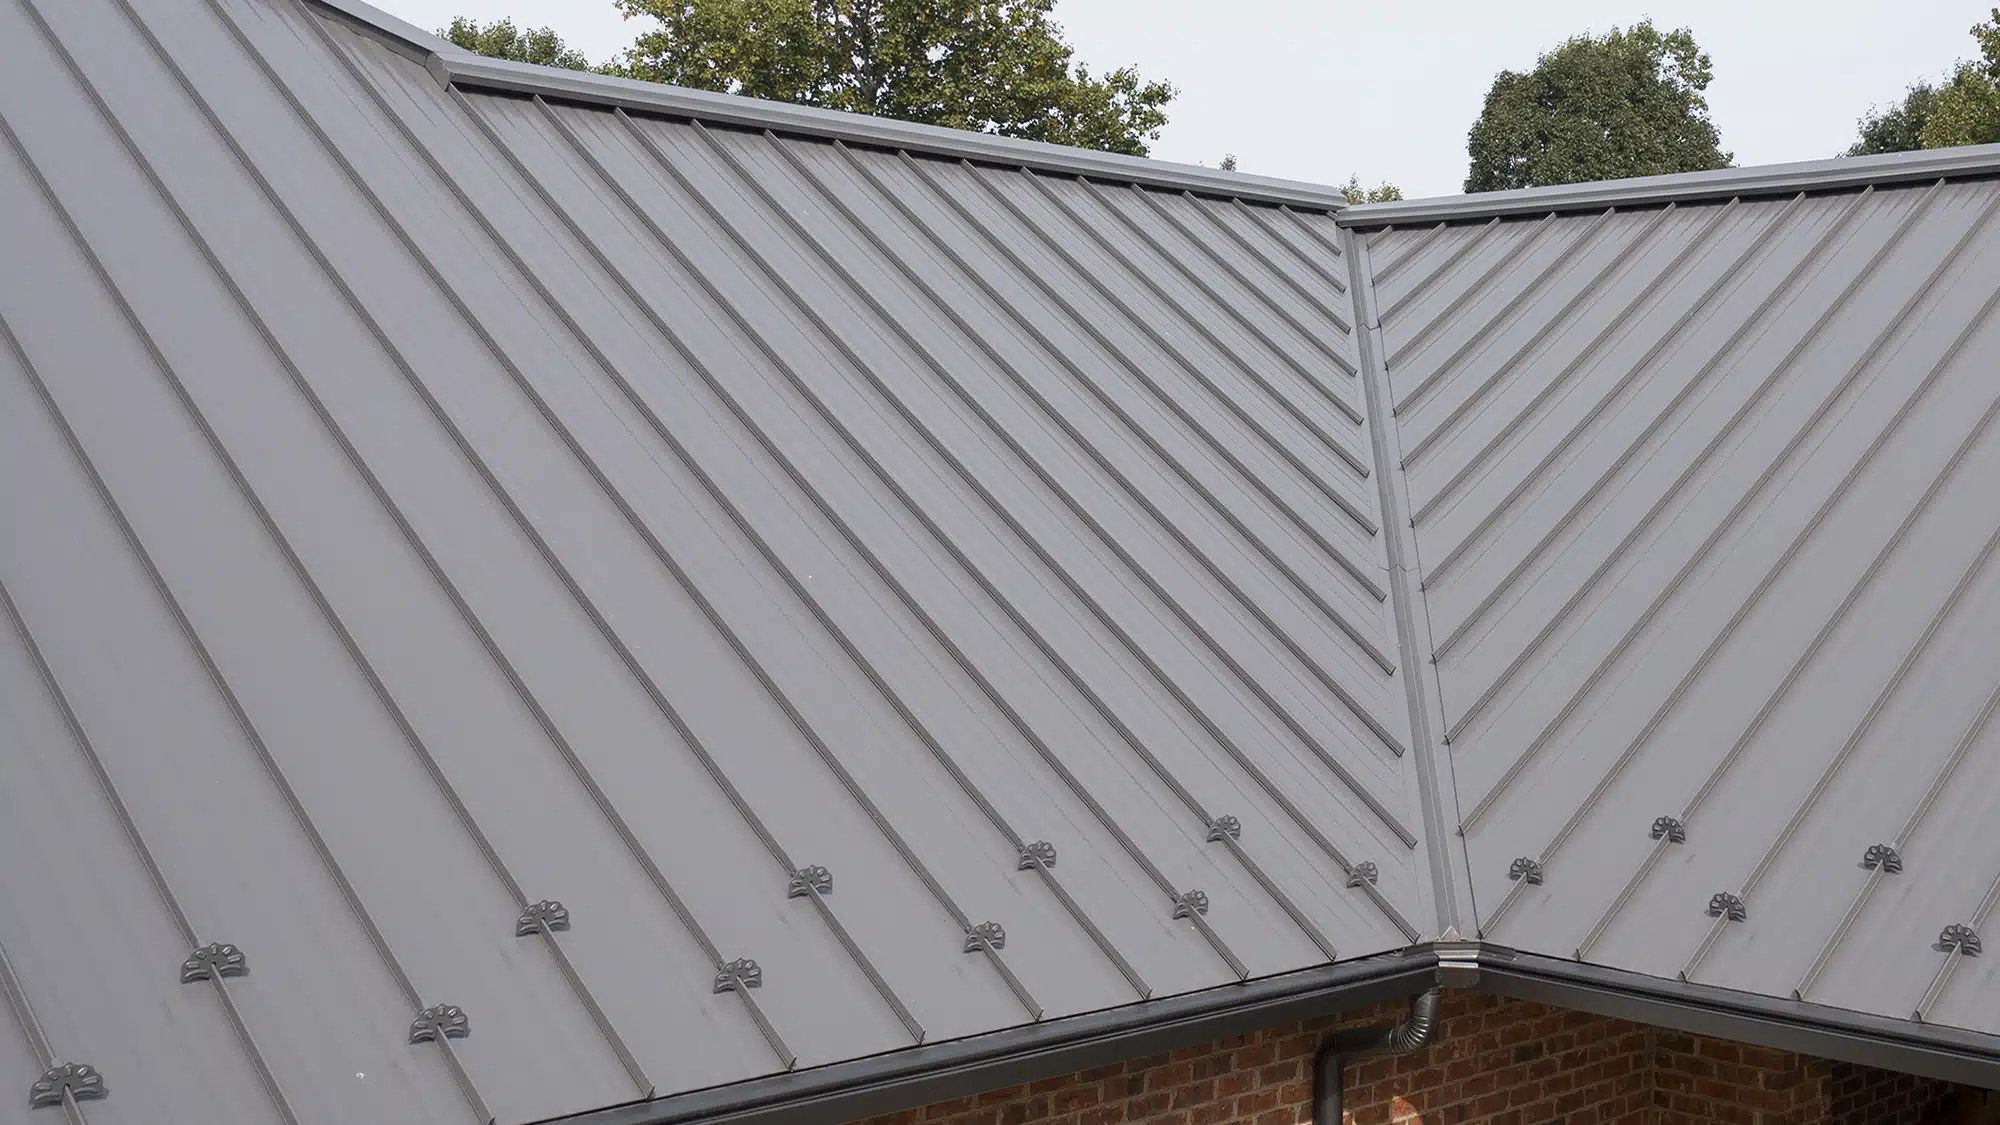 Central Snap Smoke Roof on a Residential Home